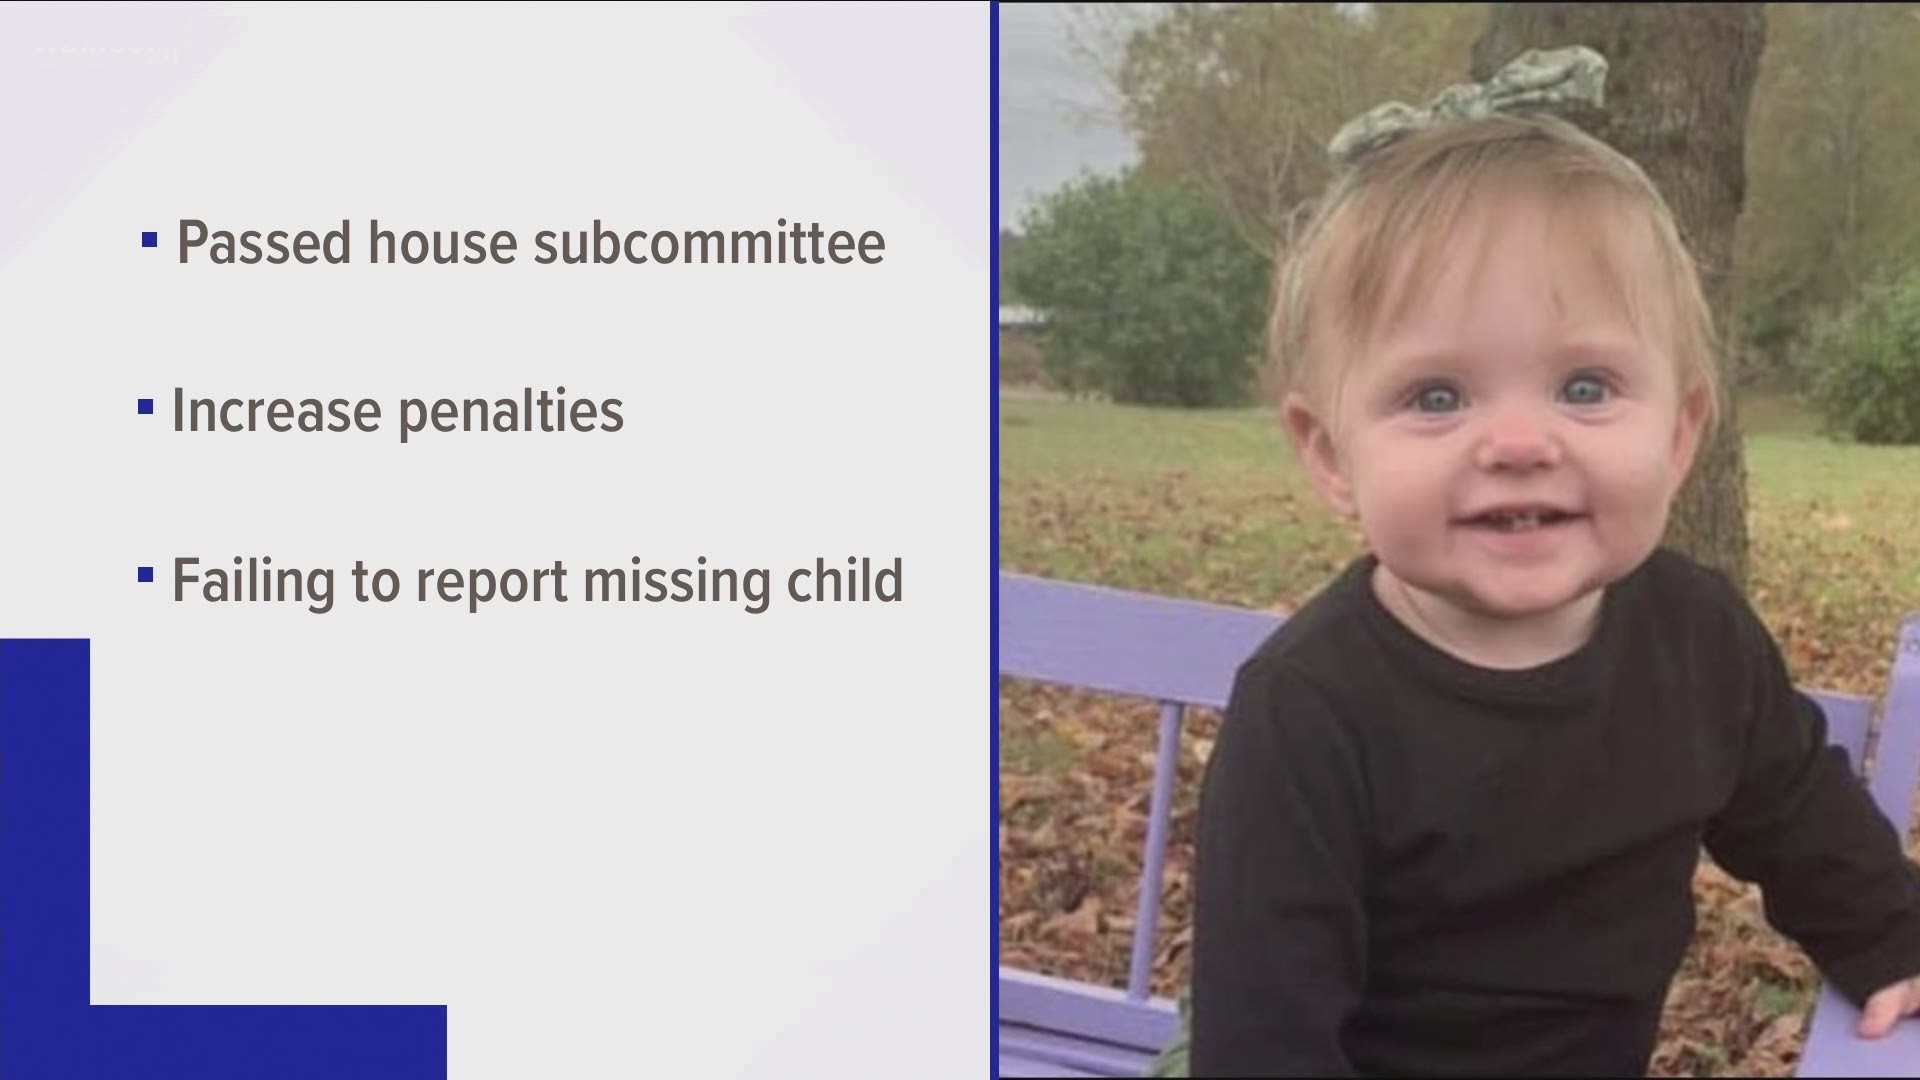 Authorities say it took weeks before Evelyn was reported missing and her body was later found. The new law hopes to change that.